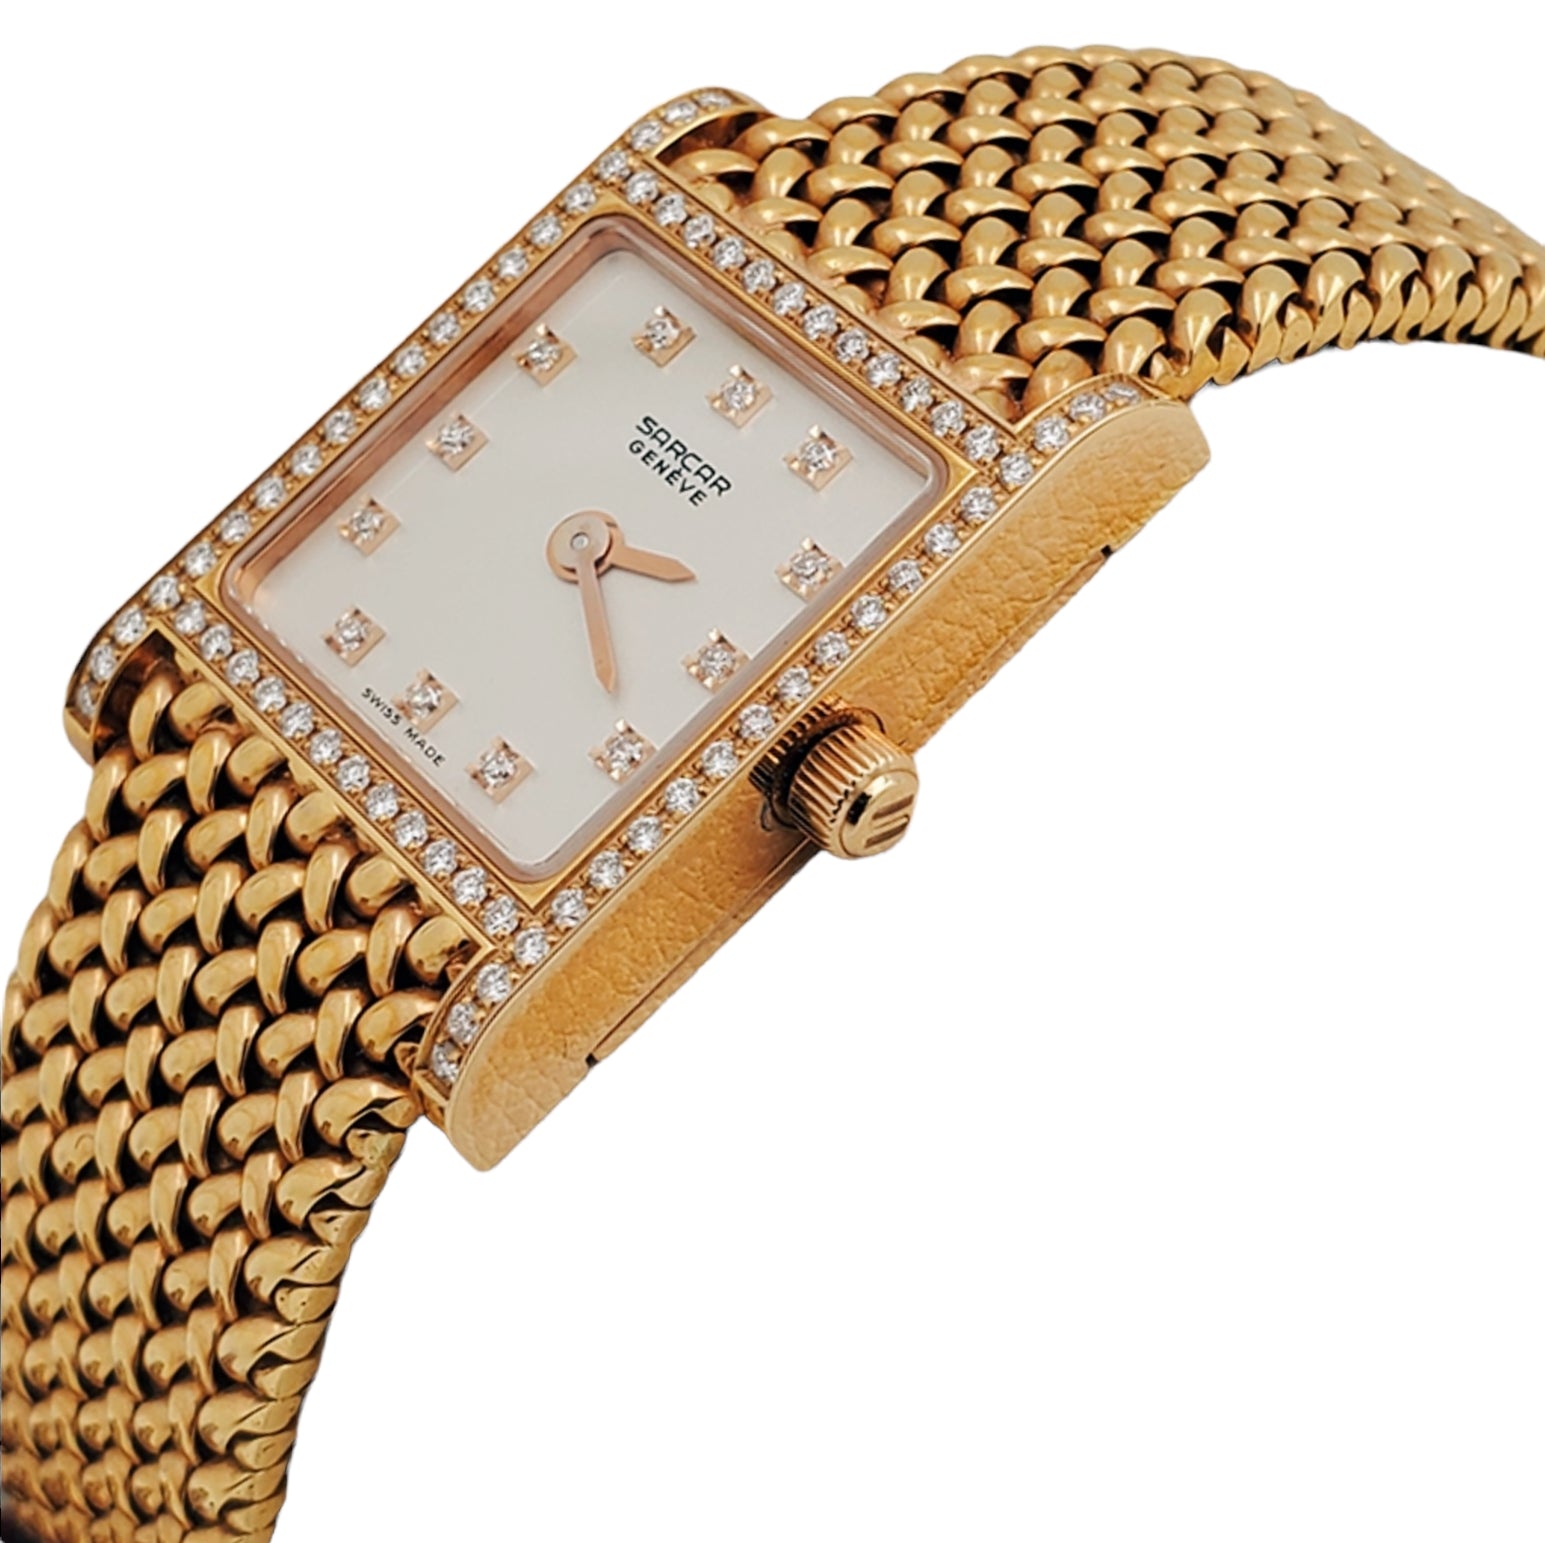 Ladies Sarcar Time Square Lady 18K Yellow Gold Watch with Solid Gold Band, Pearl White Diamond Dial and Diamond Bezel. (NEW 51503)